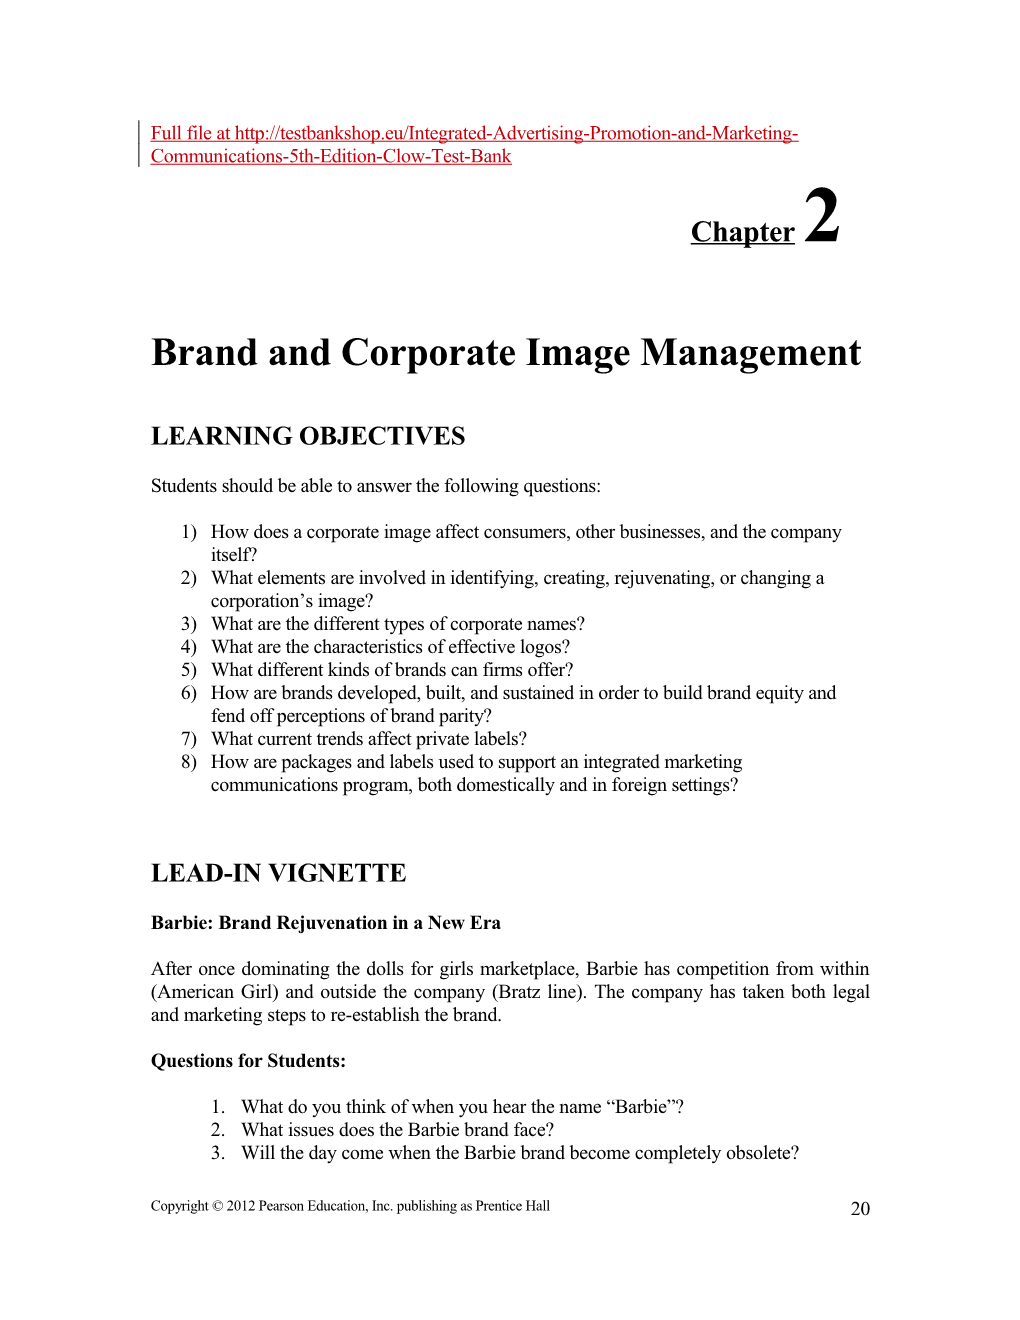 Brand and Corporate Image Management